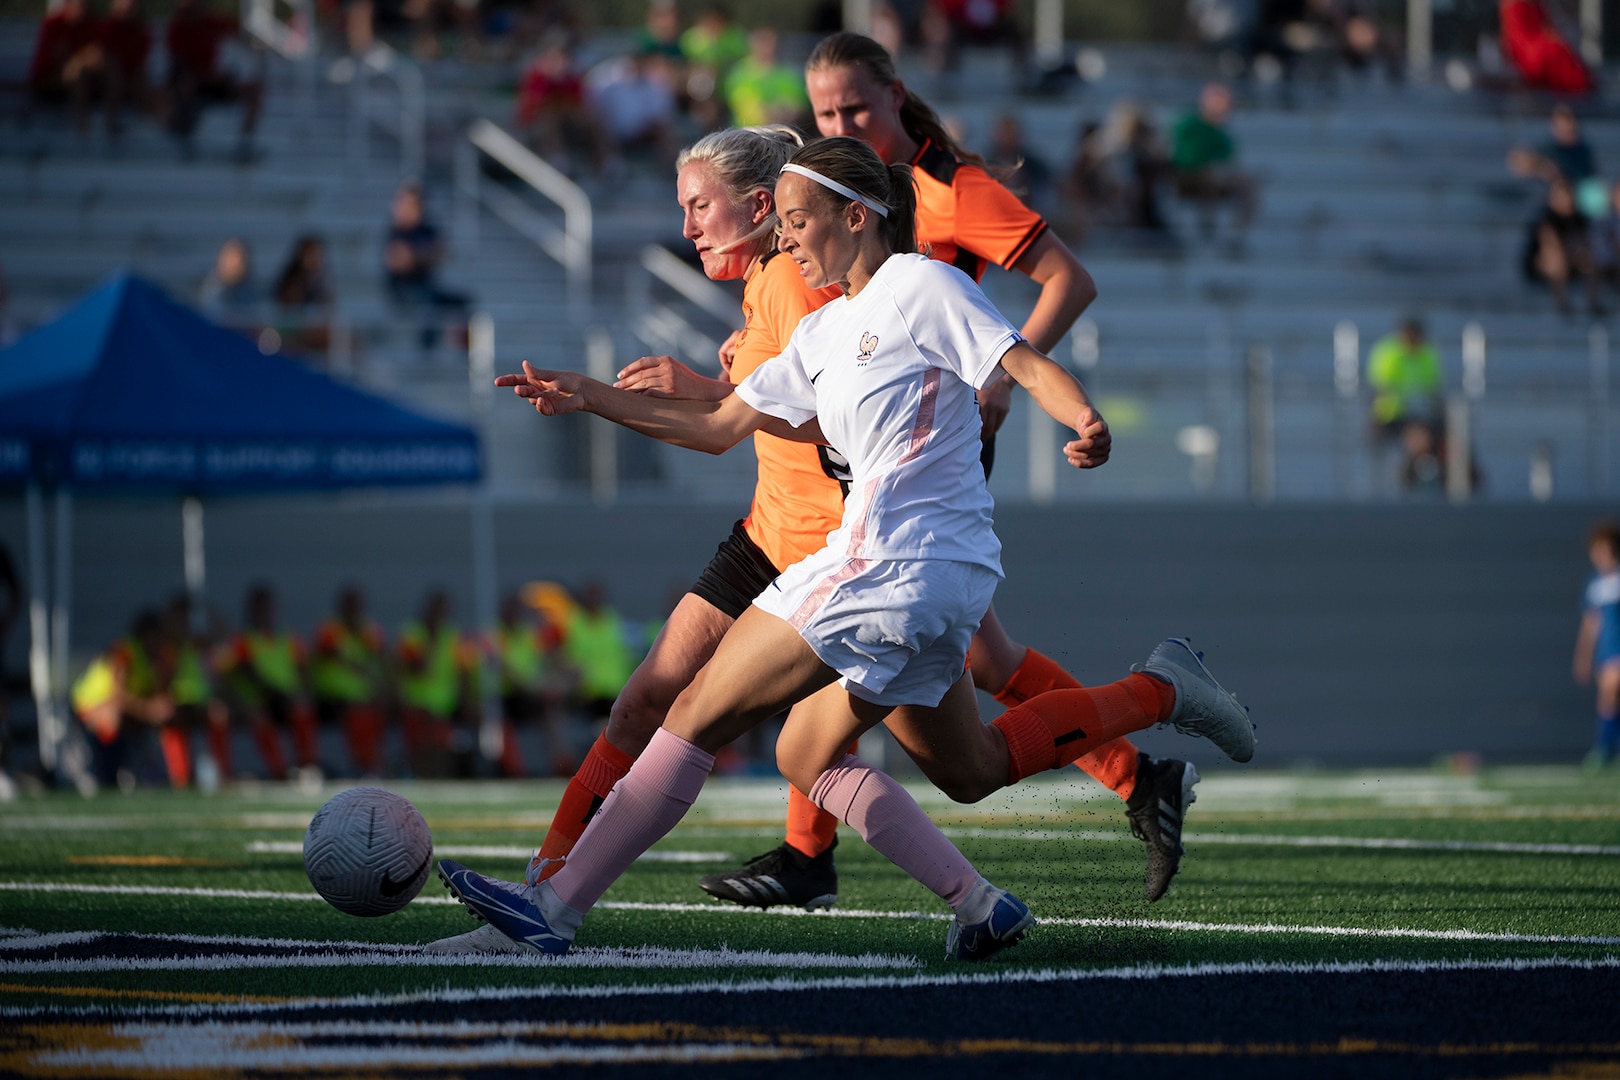 France’s Morgan Duporge makes a scoring drive during a game against Netherlands in the 13th CISM (International Military Sports Council) World Military Women’s Football Championship in Meade, Washington July 12, 2022. (DoD photo by EJ Hersom)